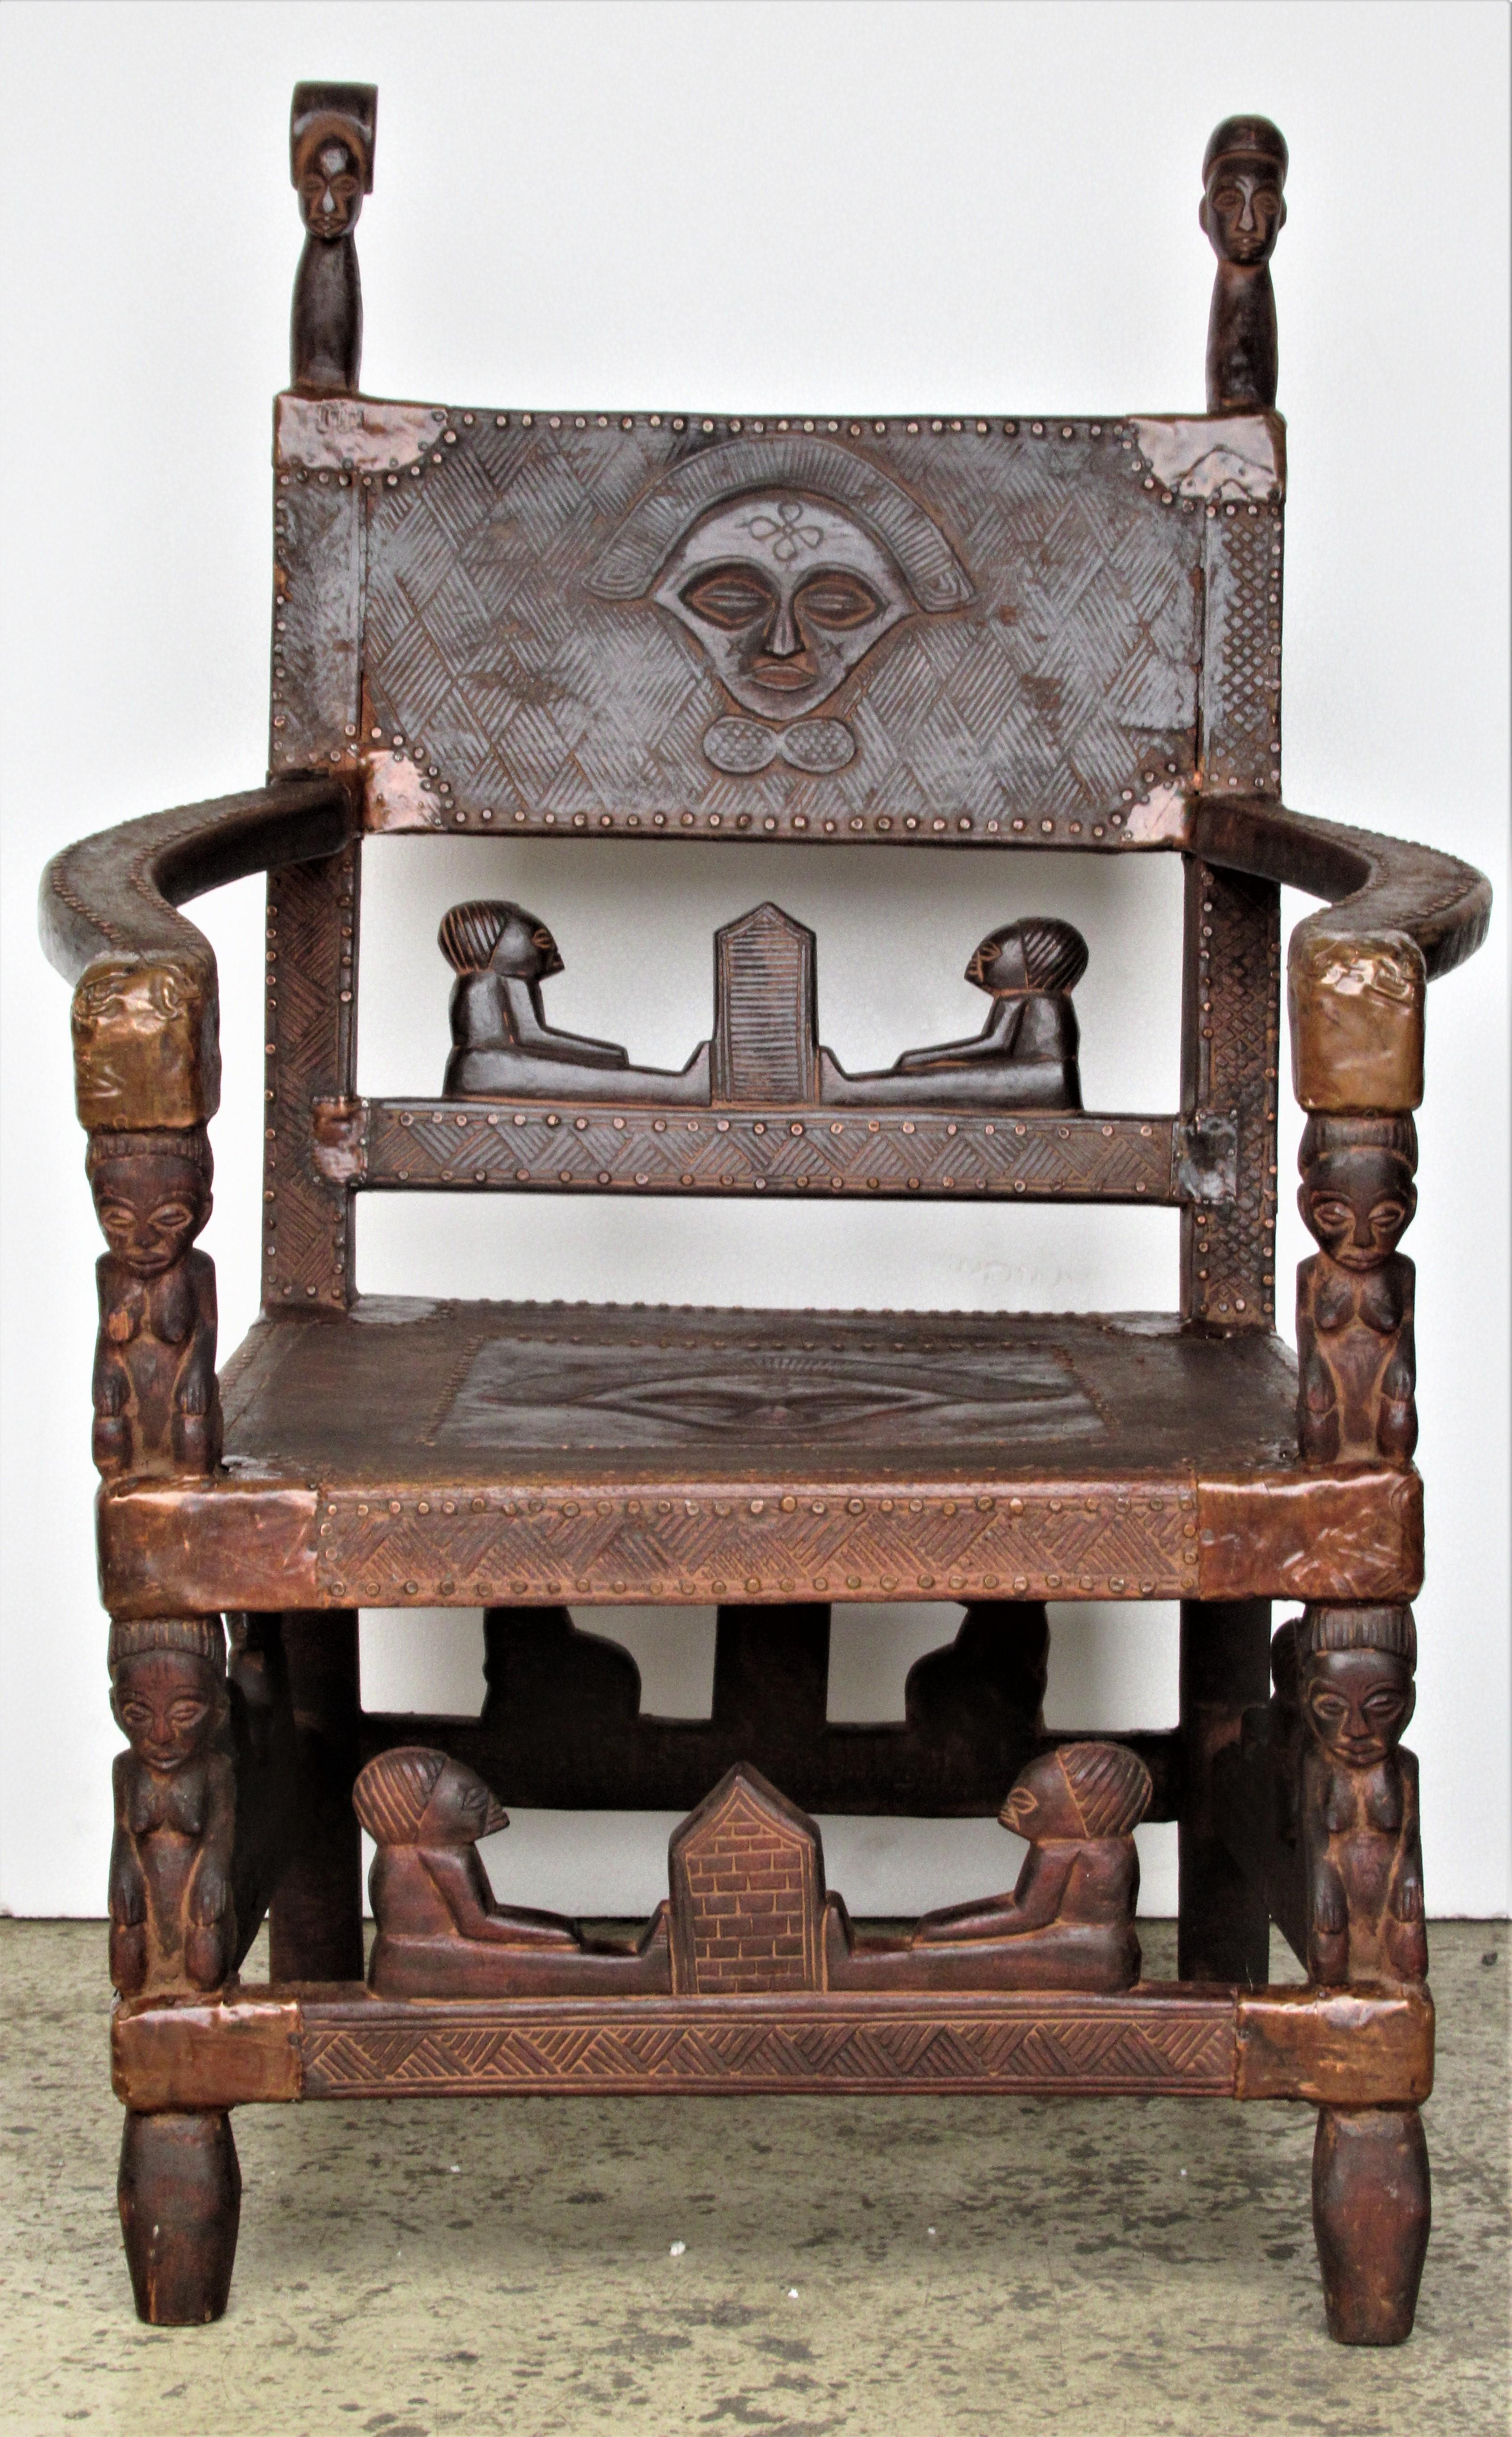 African chief throne chair from the Chokwe tribe of Angola or the south western part of the Peoples Republic of the Congo ( formerly Zaire ) hand-carved wood with copper brass metal fittings and rivets. This chair was a deaccession from a private